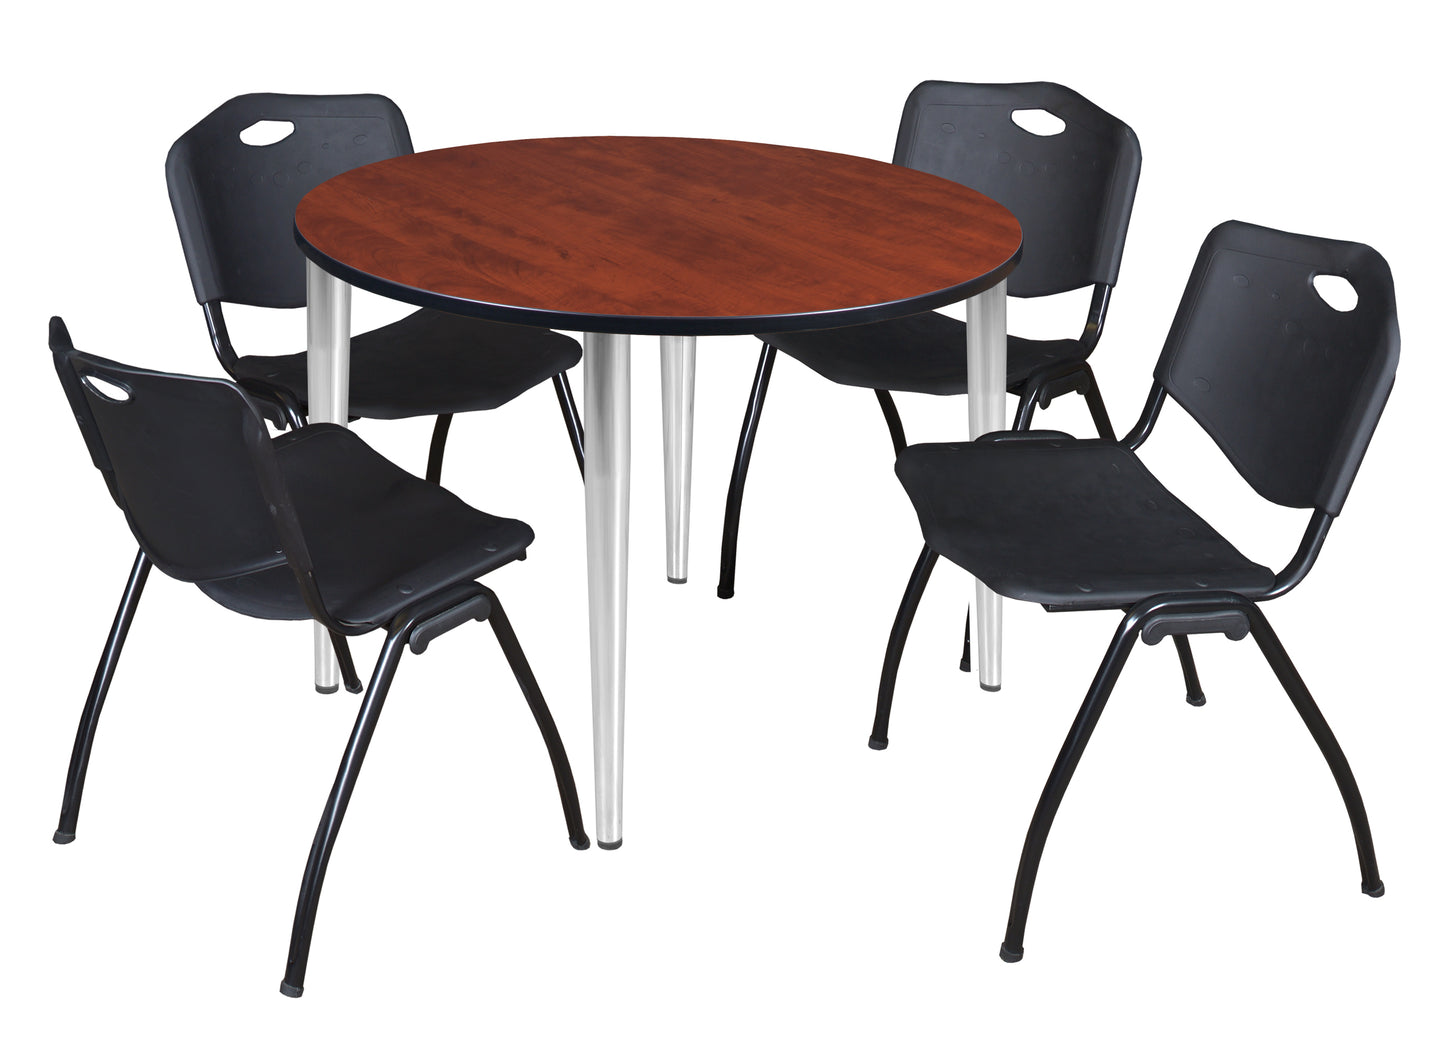 Regency Kahlo 48 in. Round Breakroom Table & 4 M Stack Chairs